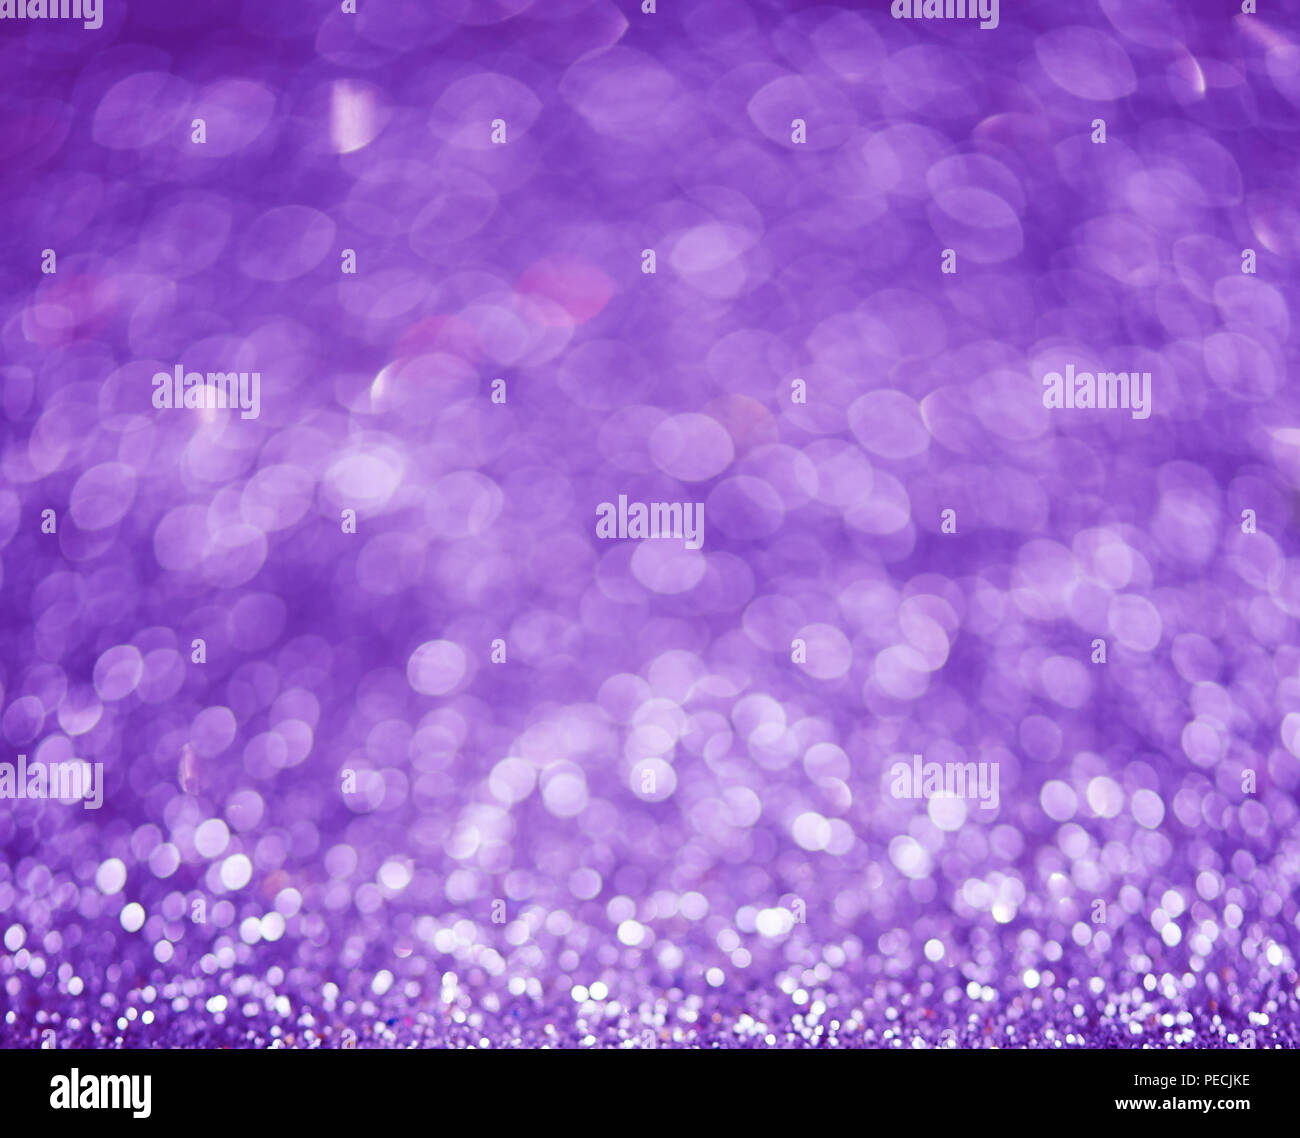 Lilac or violet bokeh background of glitter lights Stock Photo - Alamy